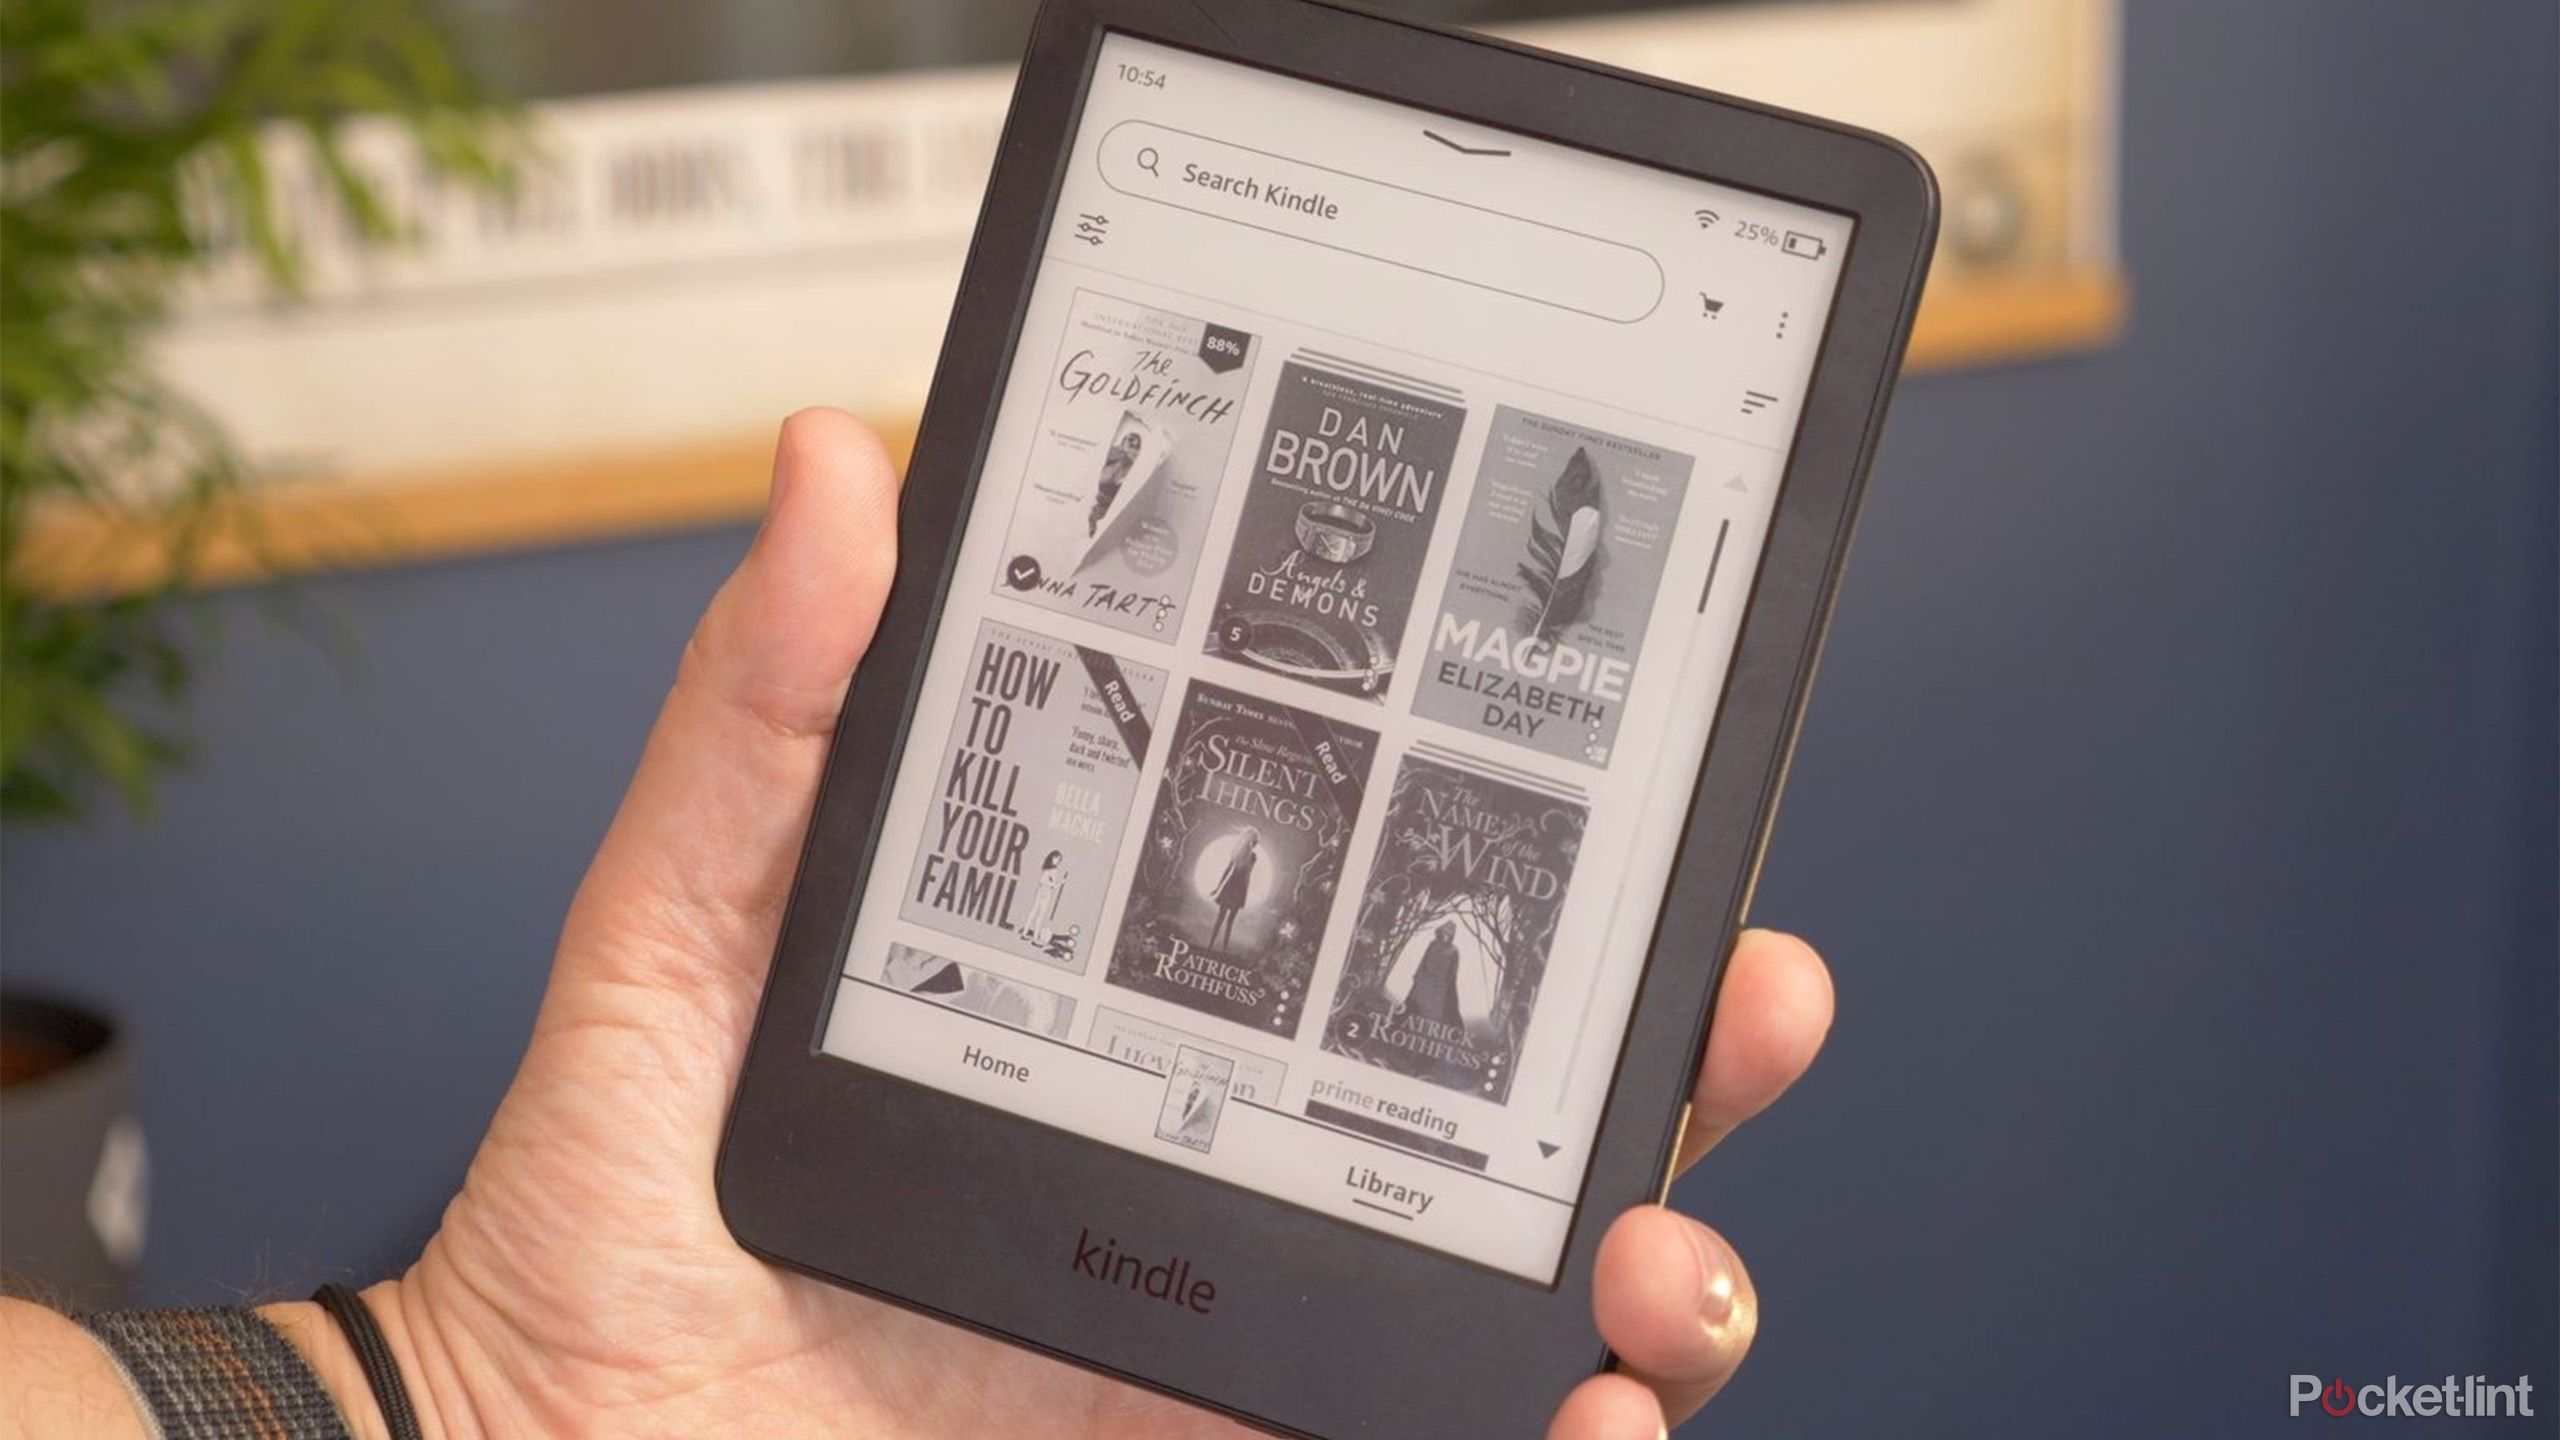 A person holding an Amazon Kindle